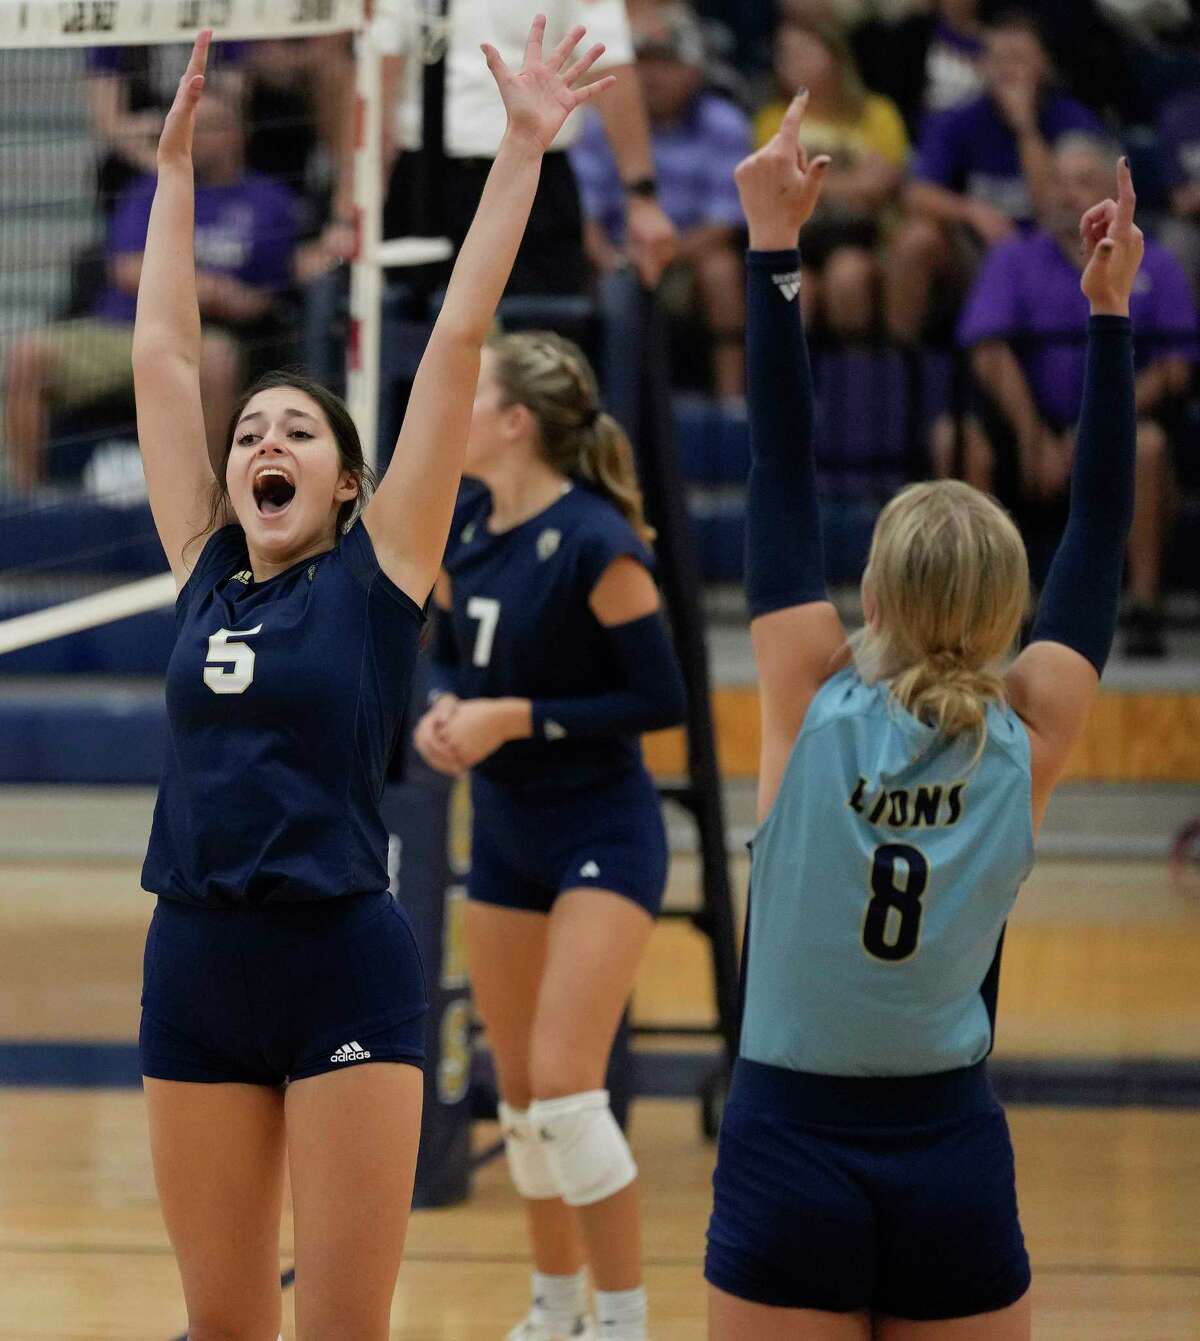 Lake Creek's Elizabeth Gunn (5) celebrates the team’s winning of the first set during a high school volleyball match against Montgomery, Tuesday, Sept. 13, 2022, in Montgomery, TX.